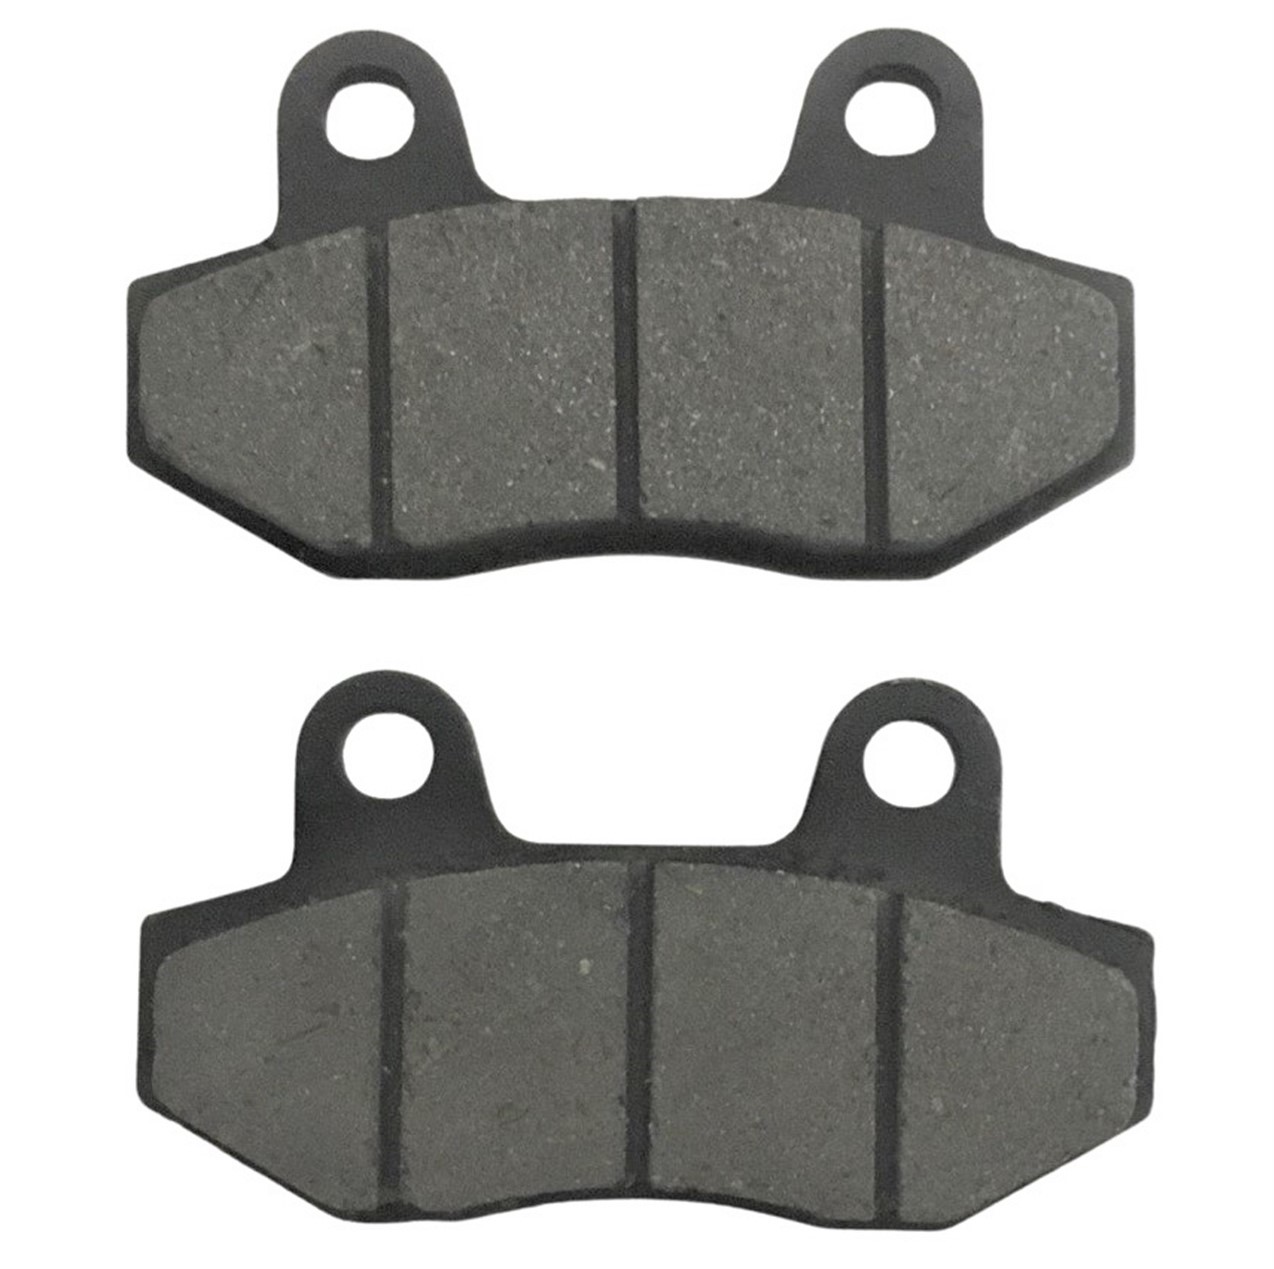 Disc Brake Pads 28x78x9 c/c 40mm Fit E-Ton Sport 50-150, Tomos Nitro 50-150 Scooters, Baja WD90, WD250 ATVs + others - Click Image to Close